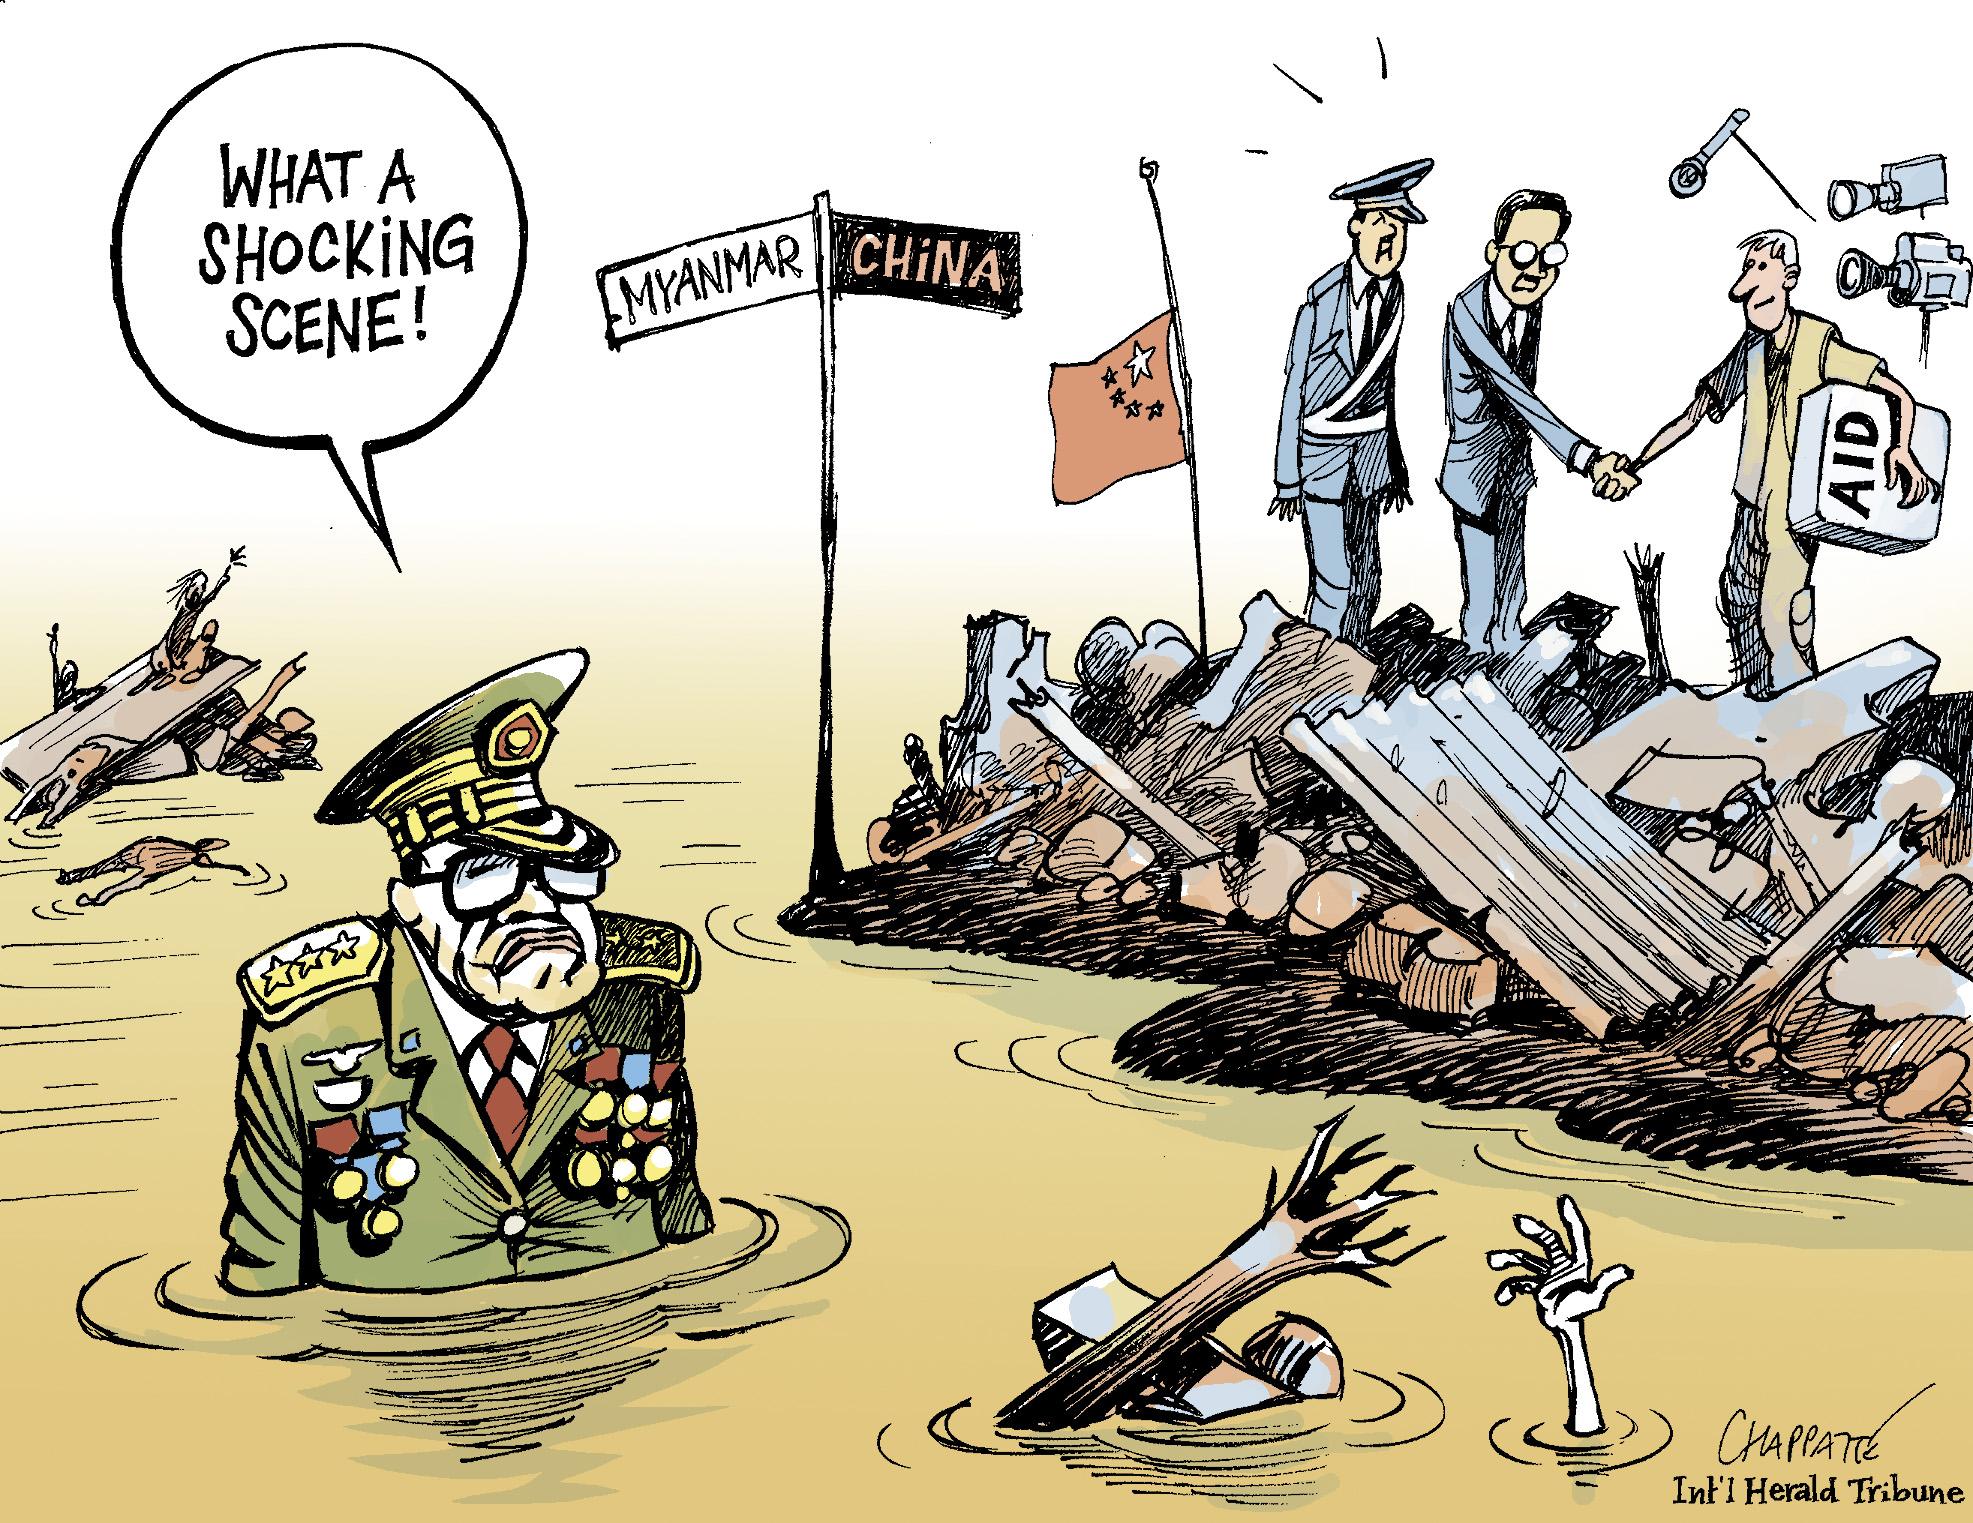 Disasters in Burma and China